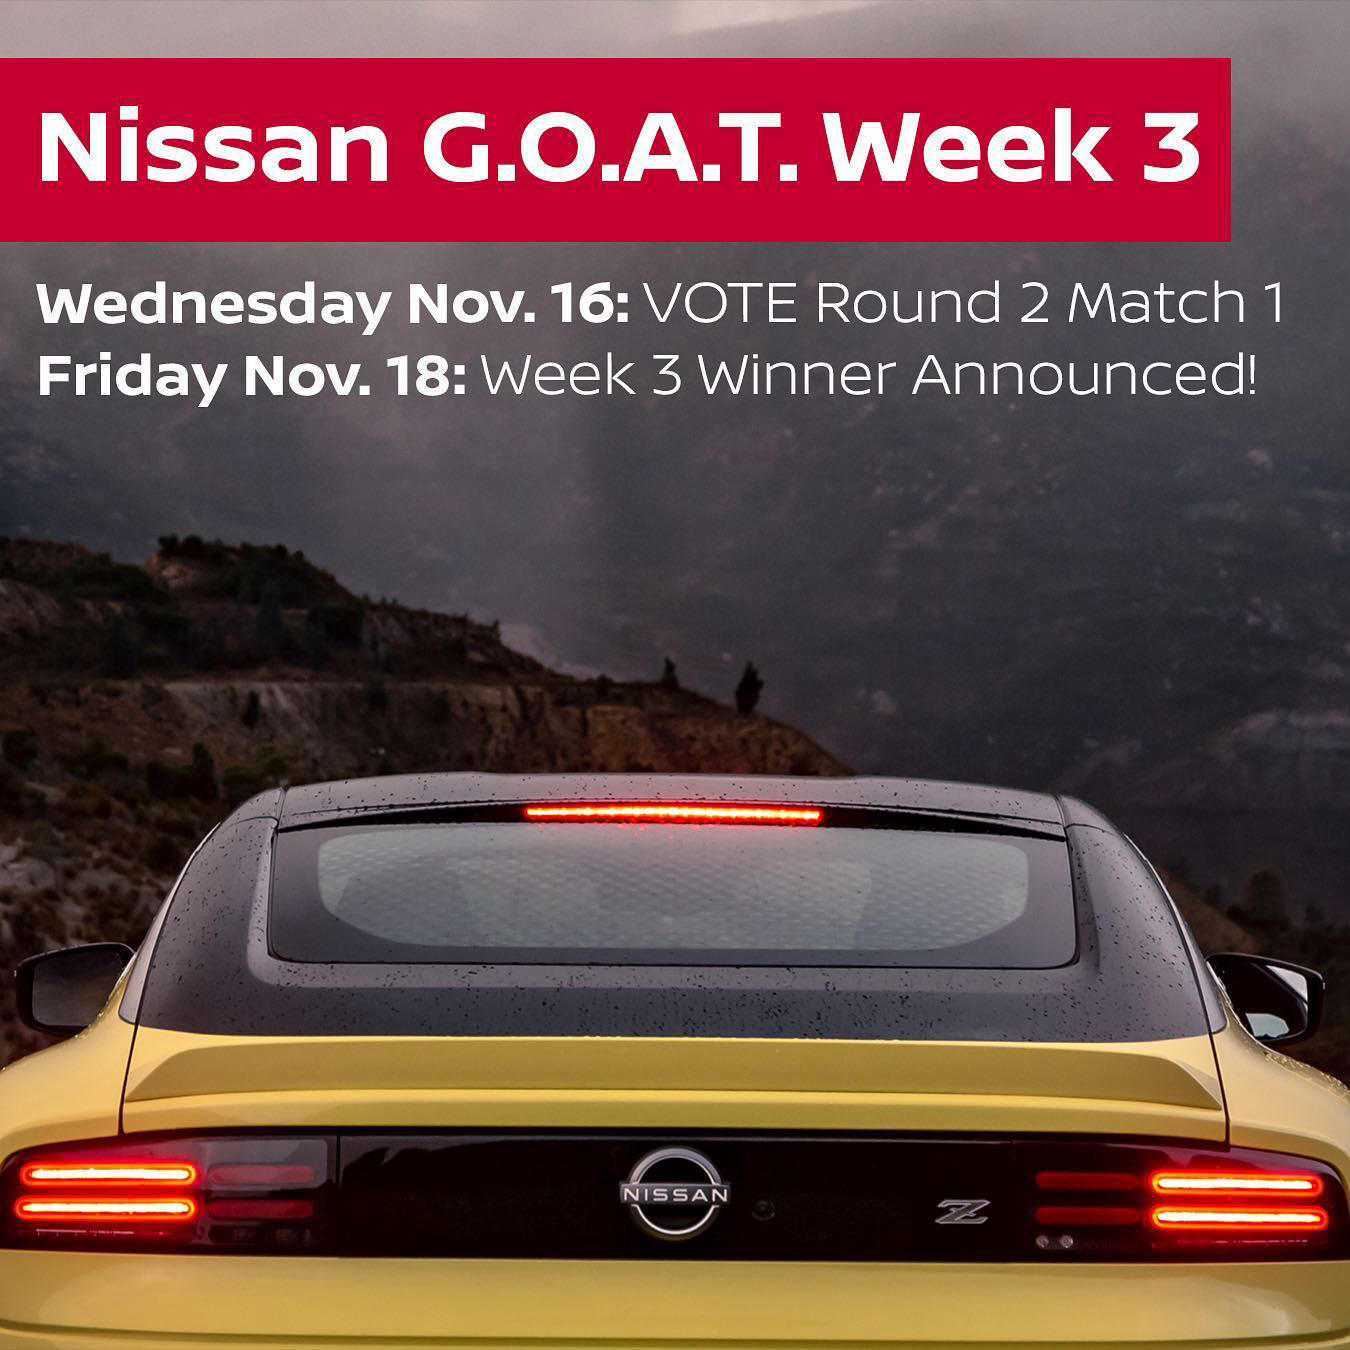 image  1 Nissan - Welcome to Week 3 of the Nissan G